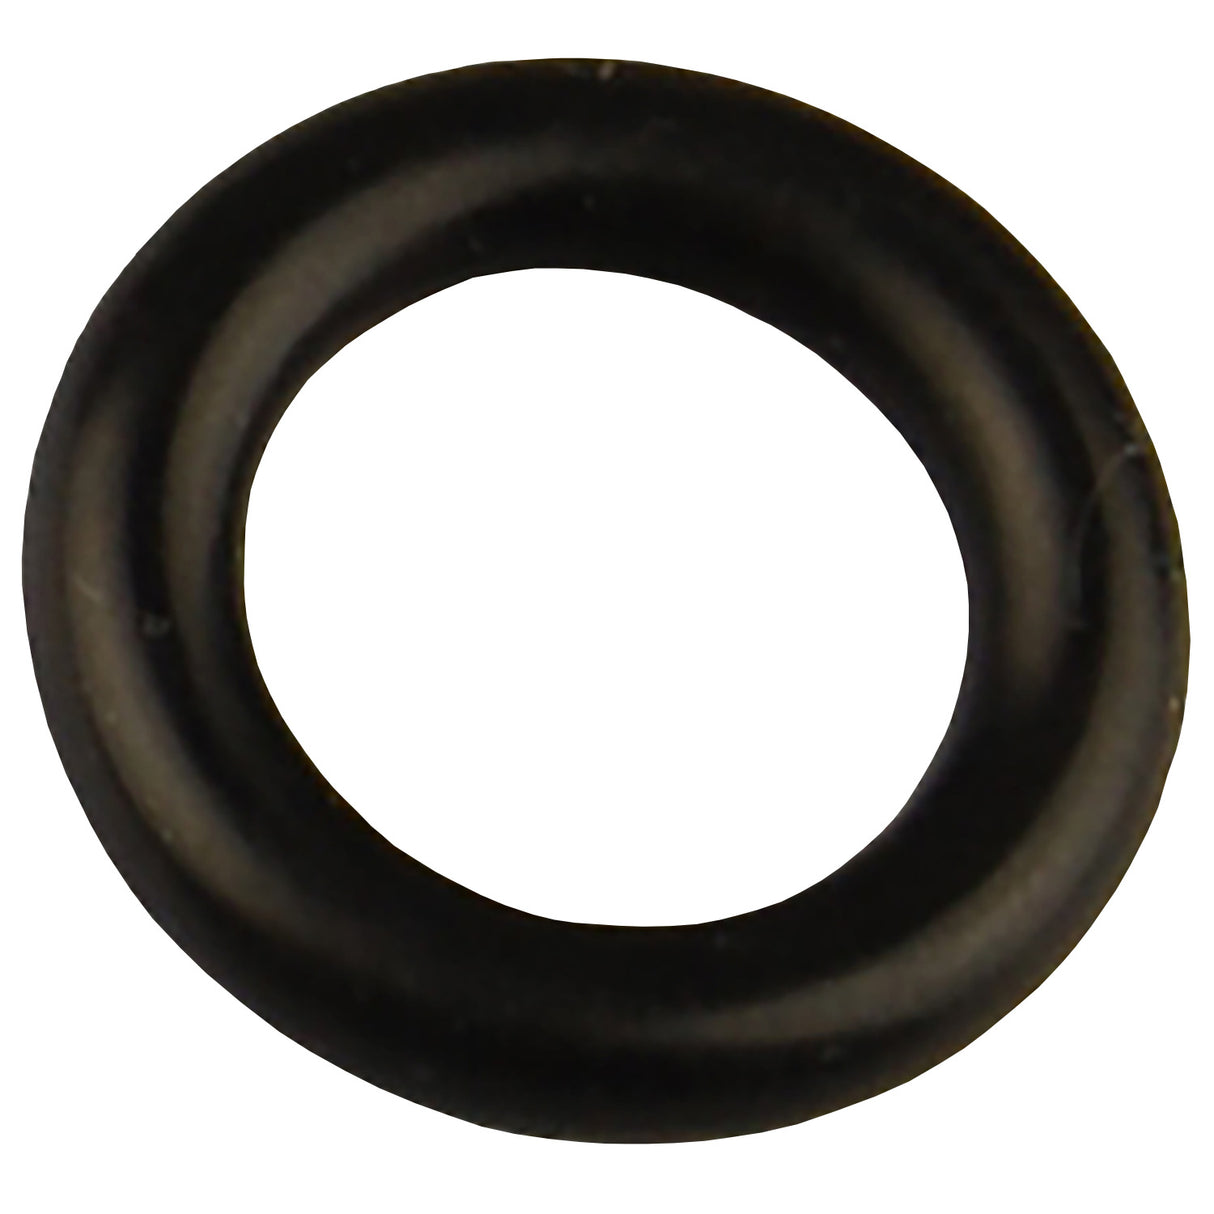 O-ring centering cup